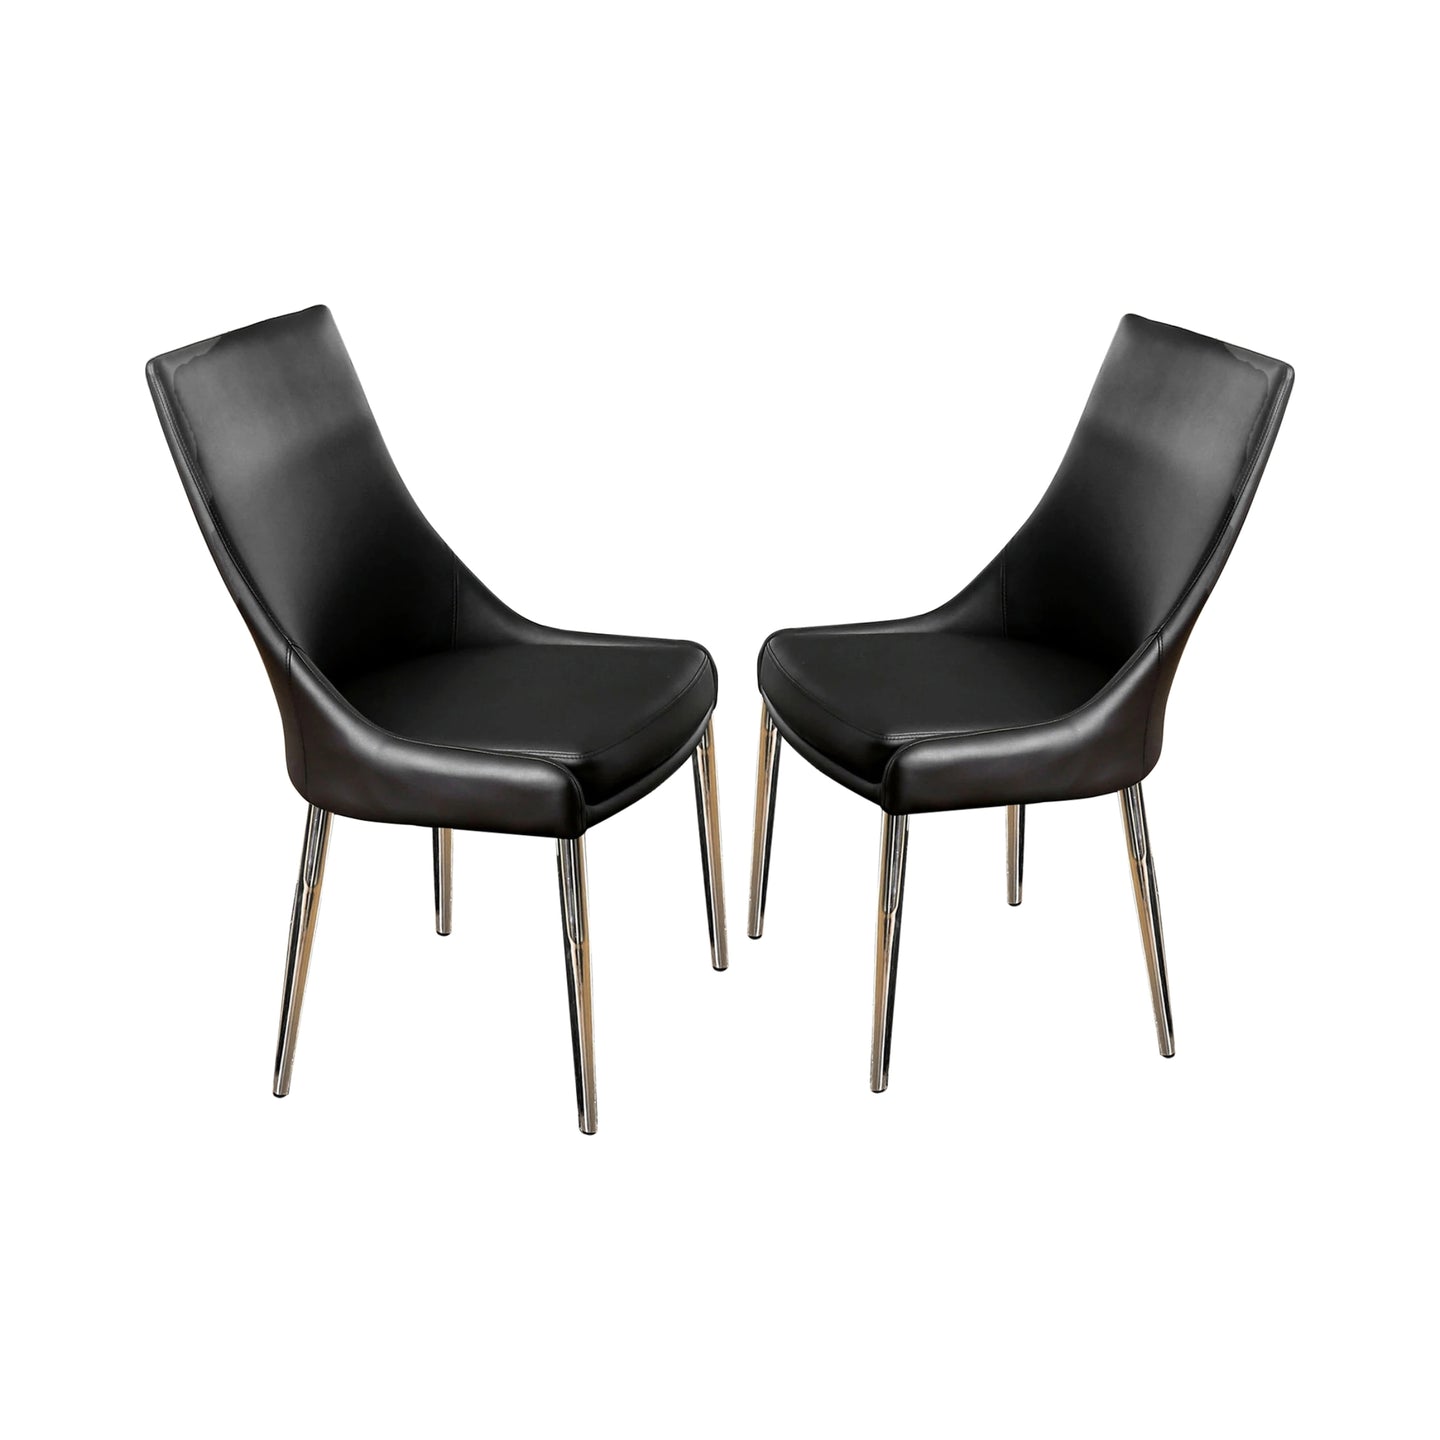 Furniture of America Eisen Contemporary Faux Leather Side Chairs in Black (Set of 2) - IDF-3384BK-SC